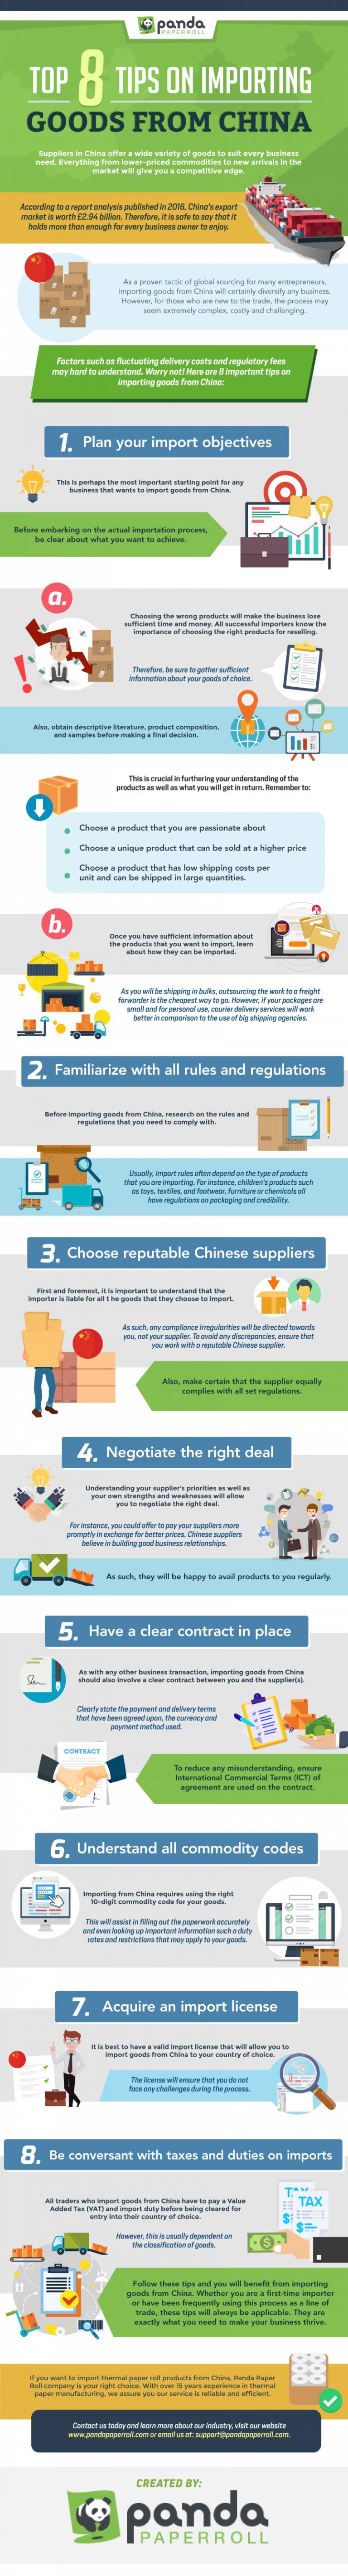 top 8 tips on importing goods from china